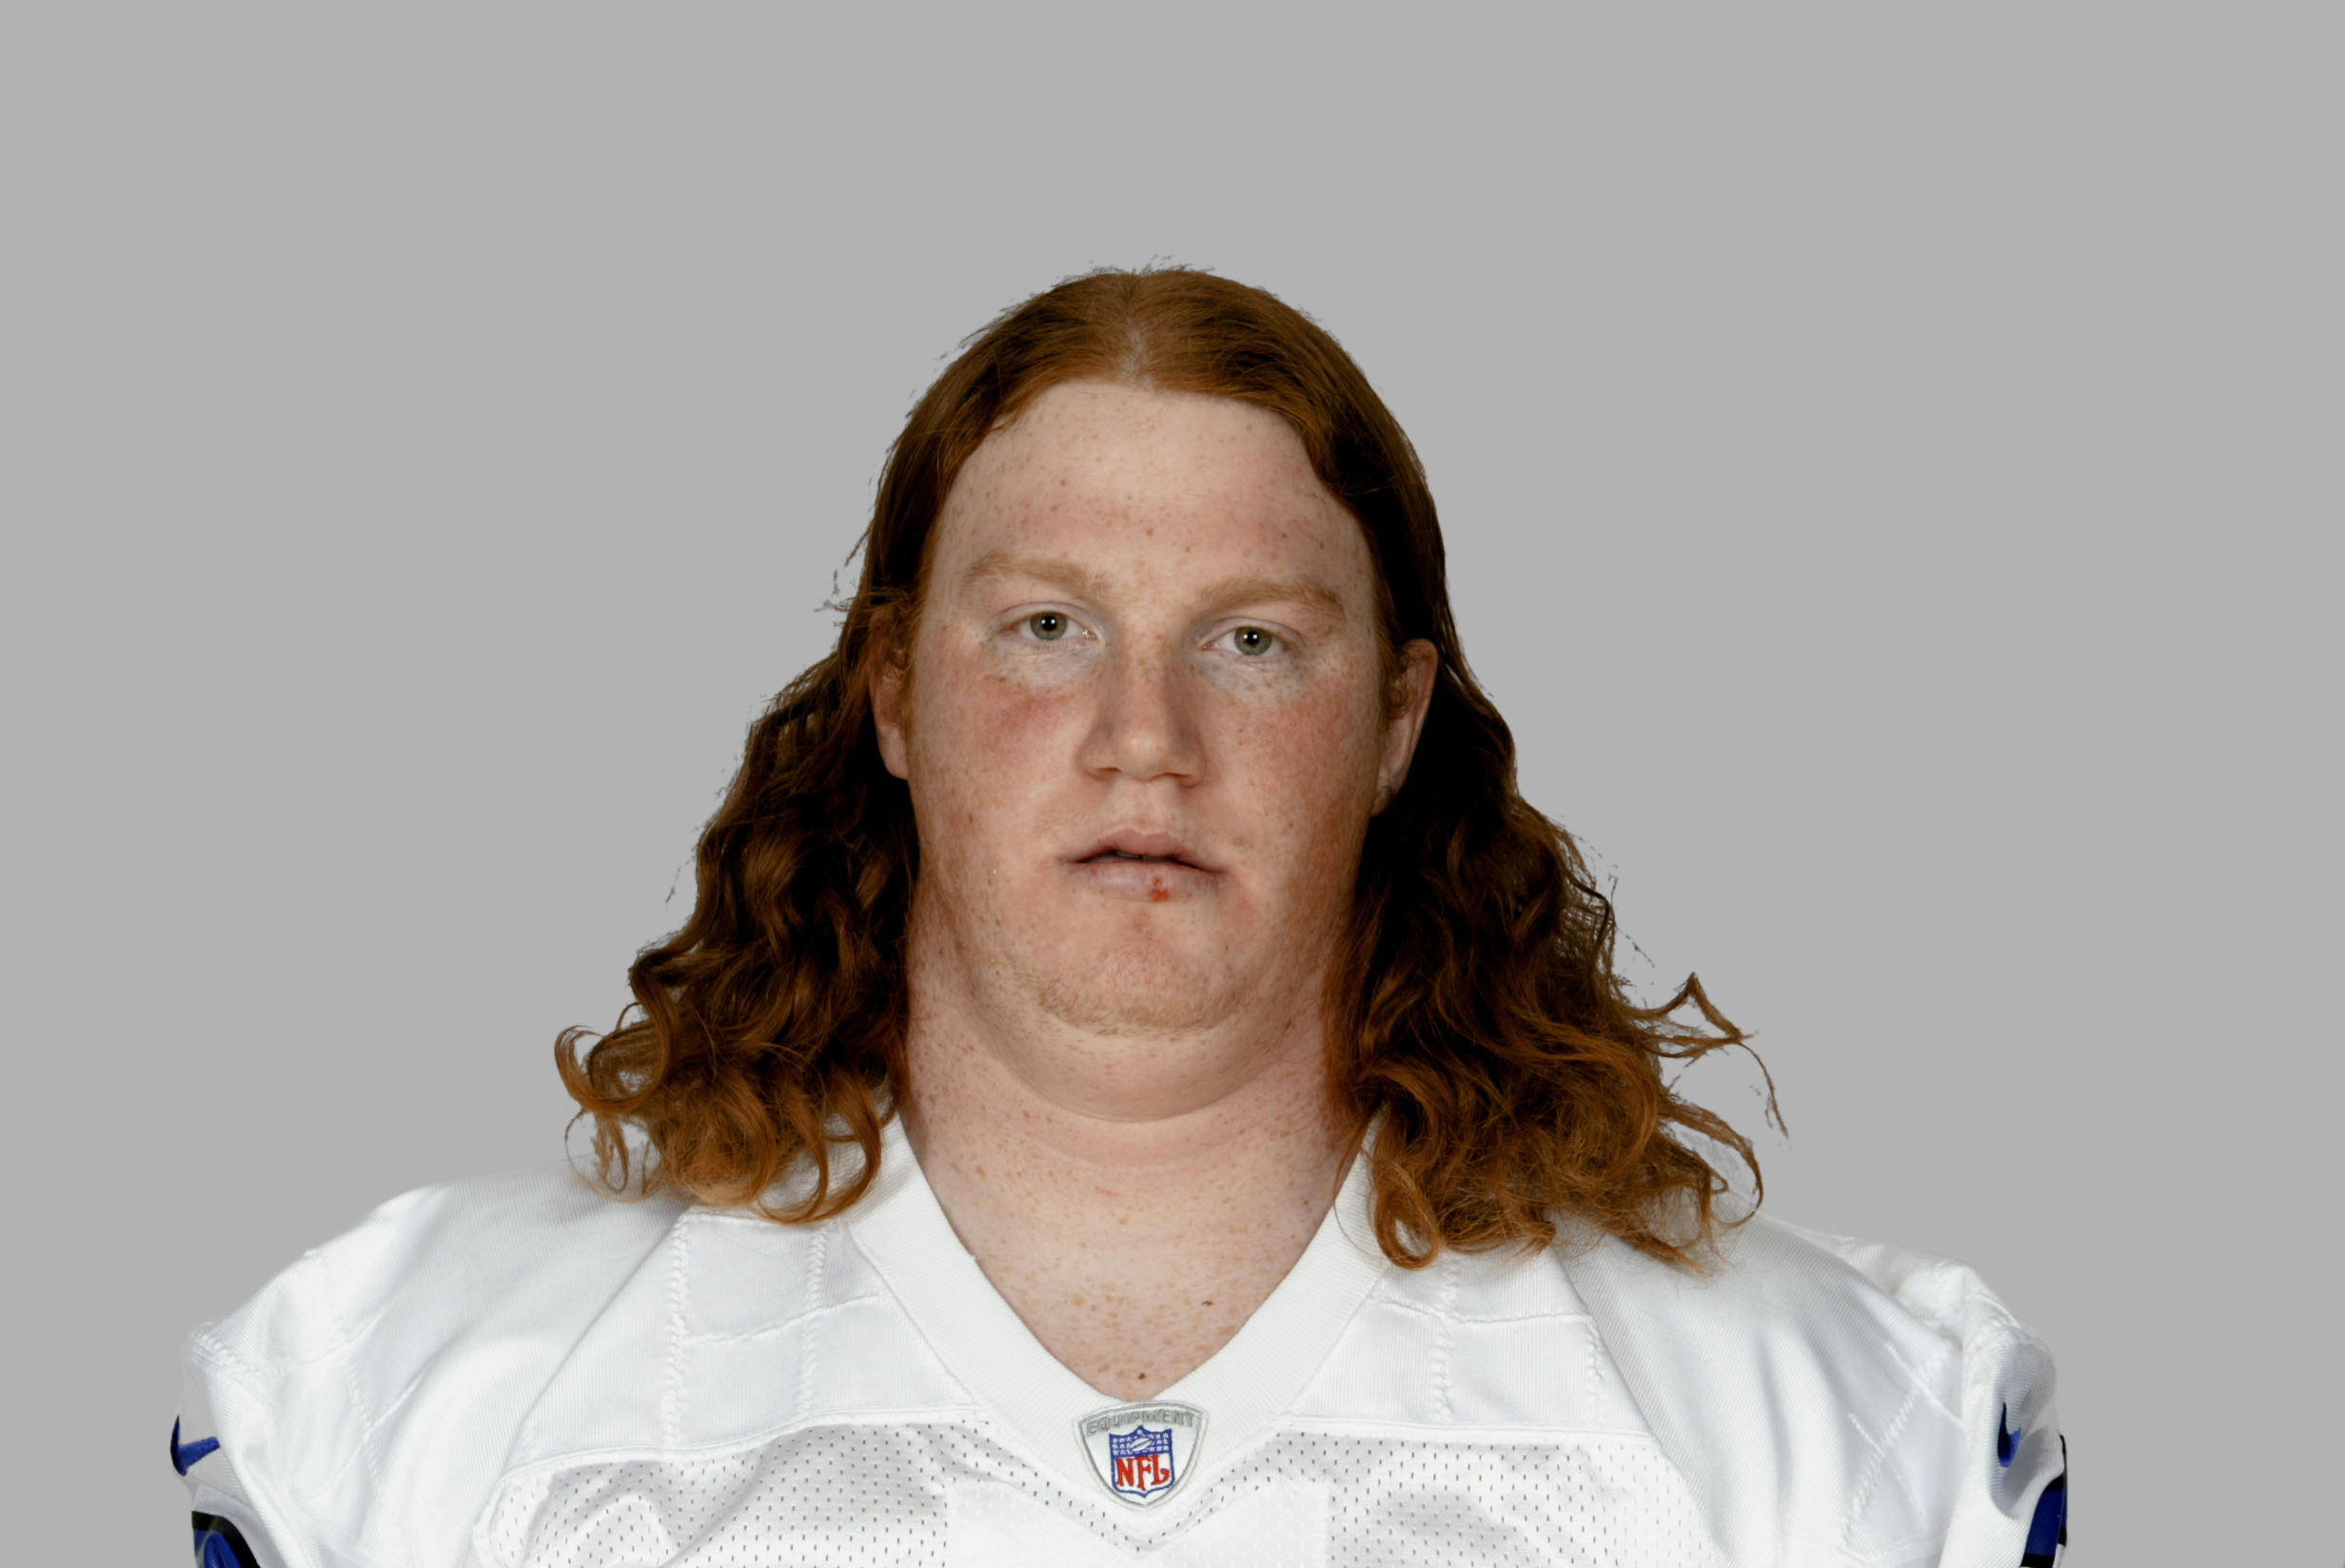 Nfl Top 10 Ugliest Players In League History Bleacher Report